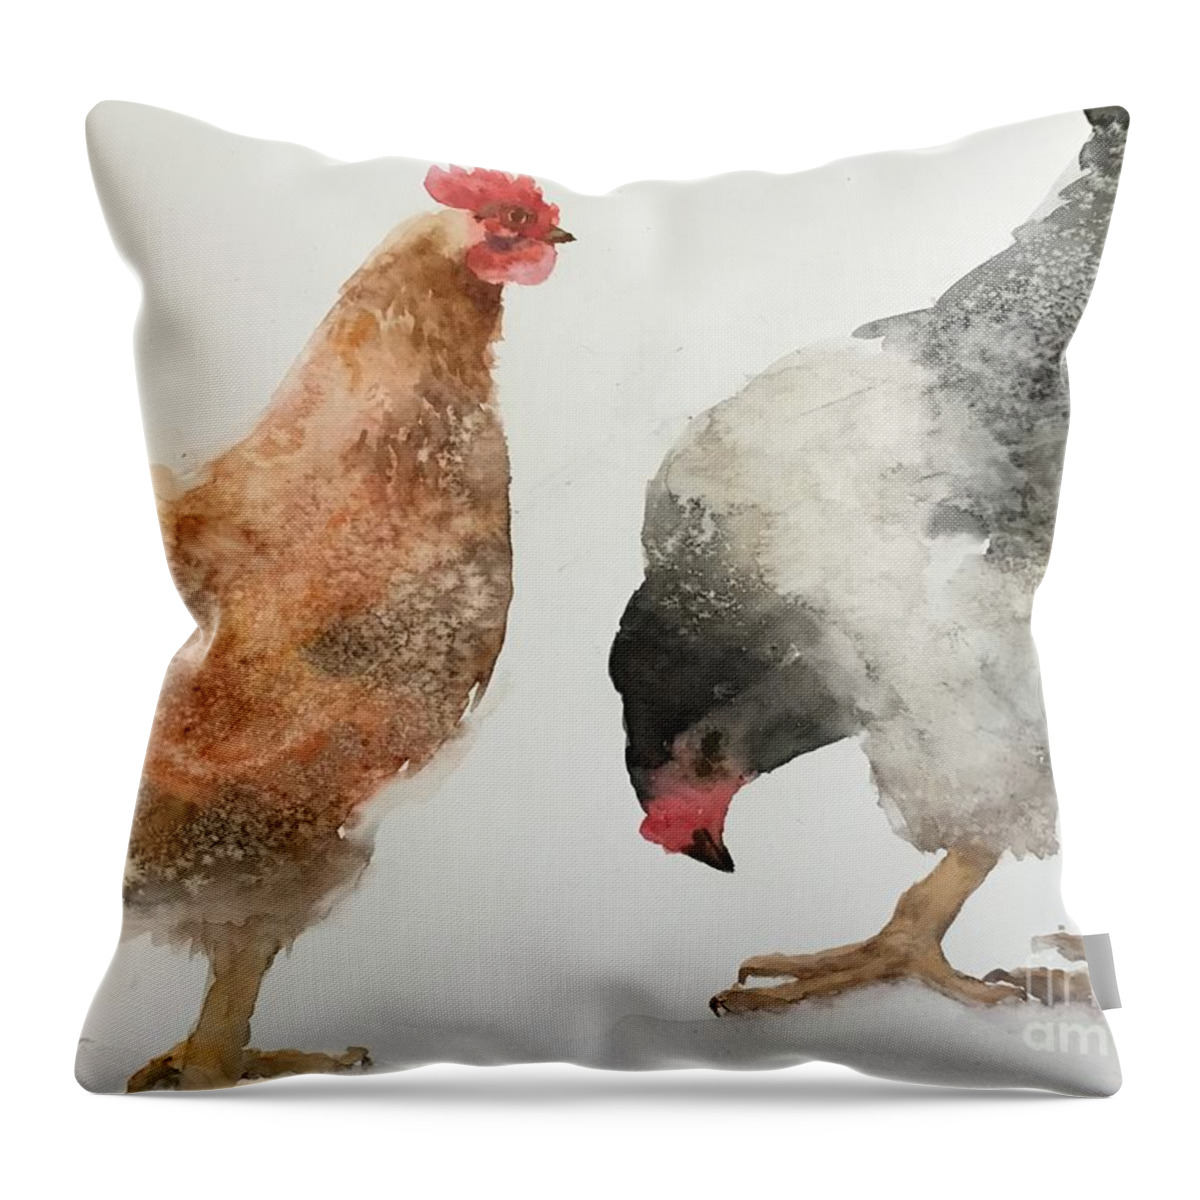 0362021 Throw Pillow featuring the painting 0362021 by Han in Huang wong